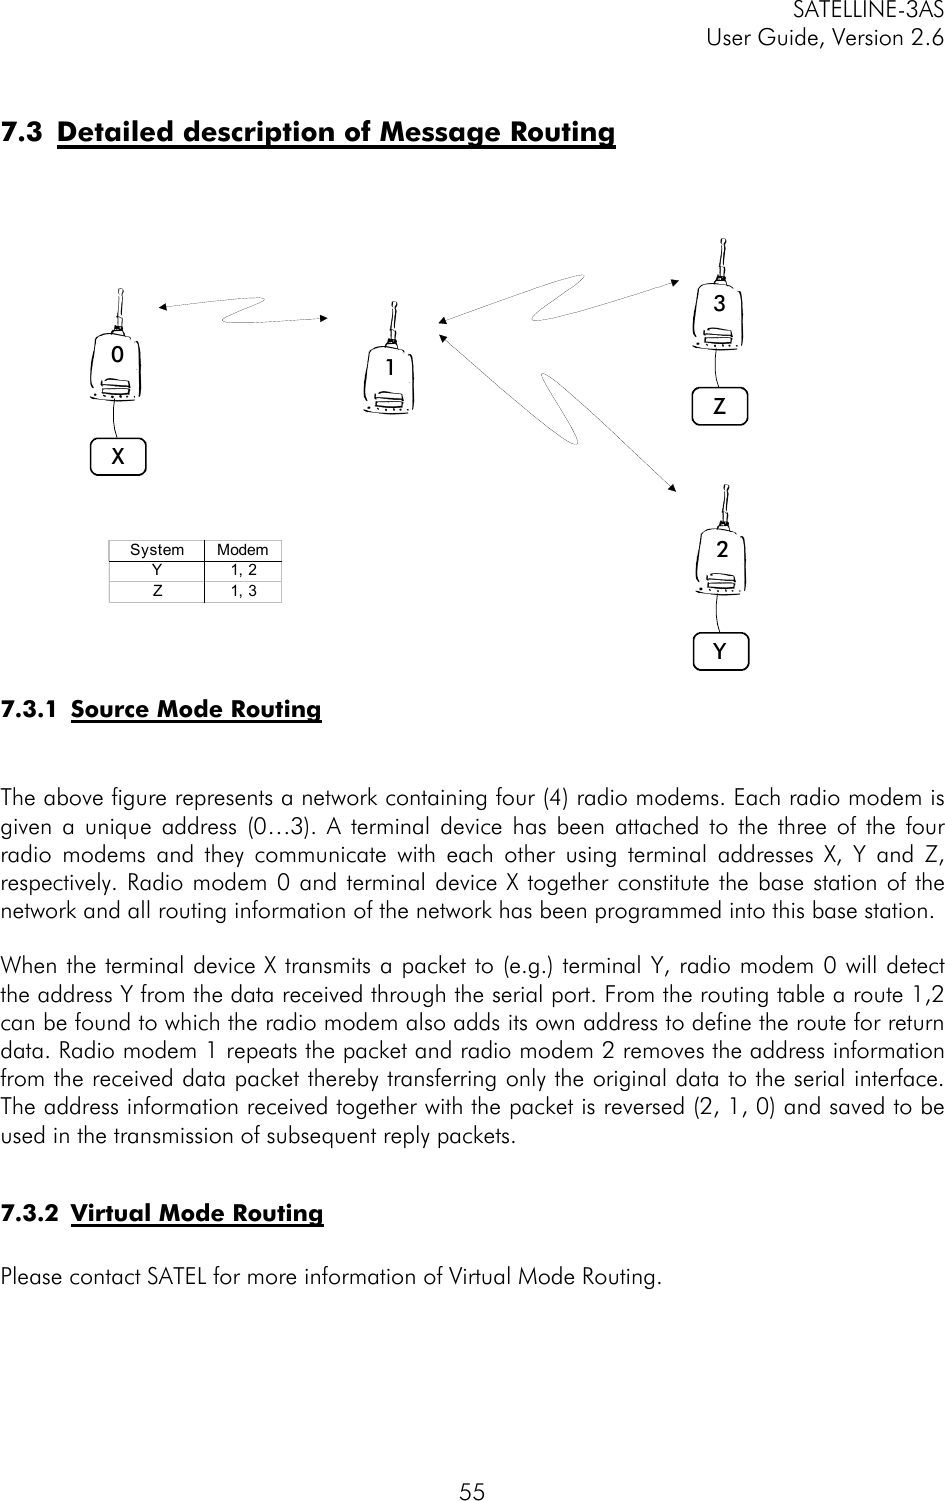 SATELLINE-3AS User Guide, Version 2.6   55 7.3 Detailed description of Message Routing   7.3.1 Source Mode Routing   The above figure represents a network containing four (4) radio modems. Each radio modem is given a unique address (0…3). A terminal device has been attached to the three of the four radio modems and they communicate with each other using terminal addresses X, Y and Z, respectively. Radio modem 0 and terminal device X together constitute the base station of the network and all routing information of the network has been programmed into this base station.   When the terminal device X transmits a packet to (e.g.) terminal Y, radio modem 0 will detect the address Y from the data received through the serial port. From the routing table a route 1,2 can be found to which the radio modem also adds its own address to define the route for return data. Radio modem 1 repeats the packet and radio modem 2 removes the address information from the received data packet thereby transferring only the original data to the serial interface. The address information received together with the packet is reversed (2, 1, 0) and saved to be used in the transmission of subsequent reply packets.   7.3.2 Virtual Mode Routing  Please contact SATEL for more information of Virtual Mode Routing.    0132XYZSystem ModemY1, 2Z1, 3